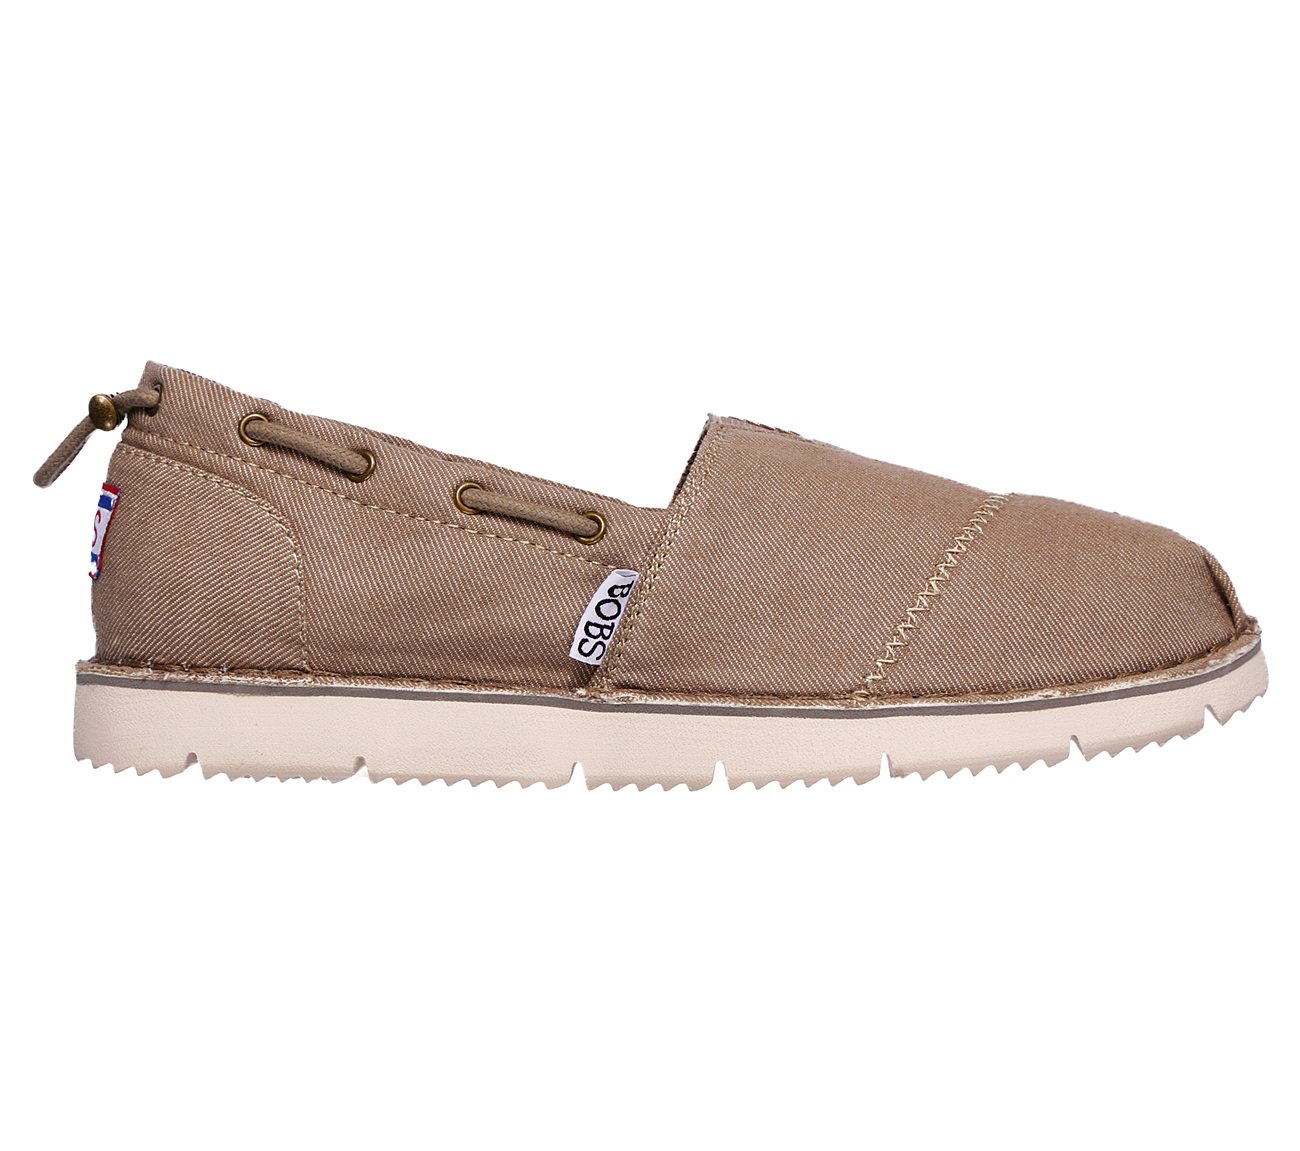 Buy SKECHERS BOBS Chill Flex - New Groove BOBS Shoes